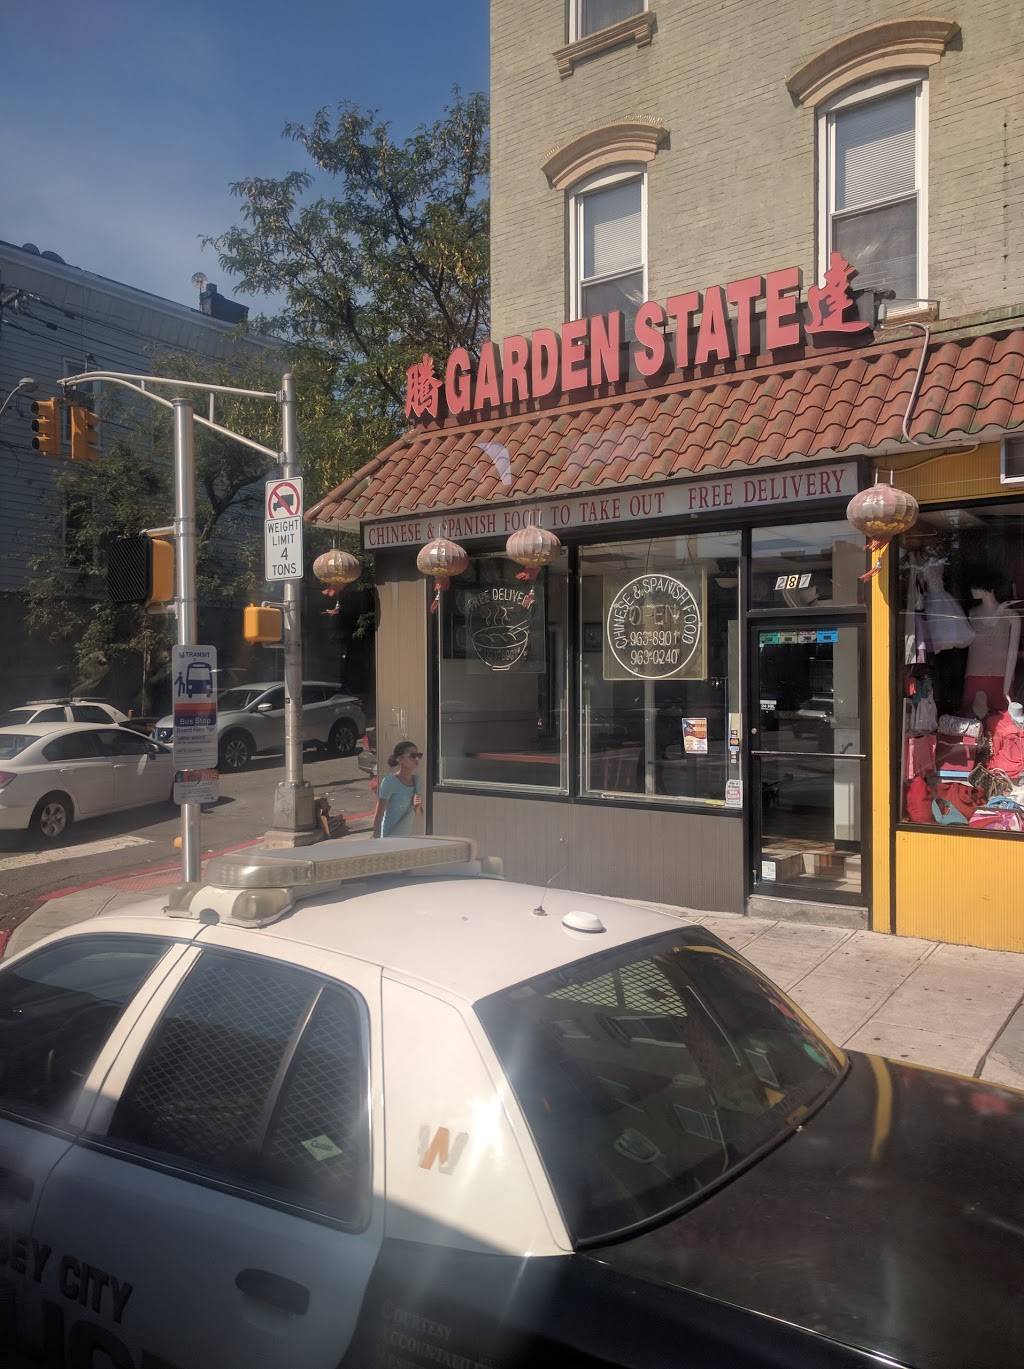 Garden State Chinese Restaurant | restaurant | 2910, 287 Central Ave, Jersey City, NJ 07307, USA | 2019638901 OR +1 201-963-8901